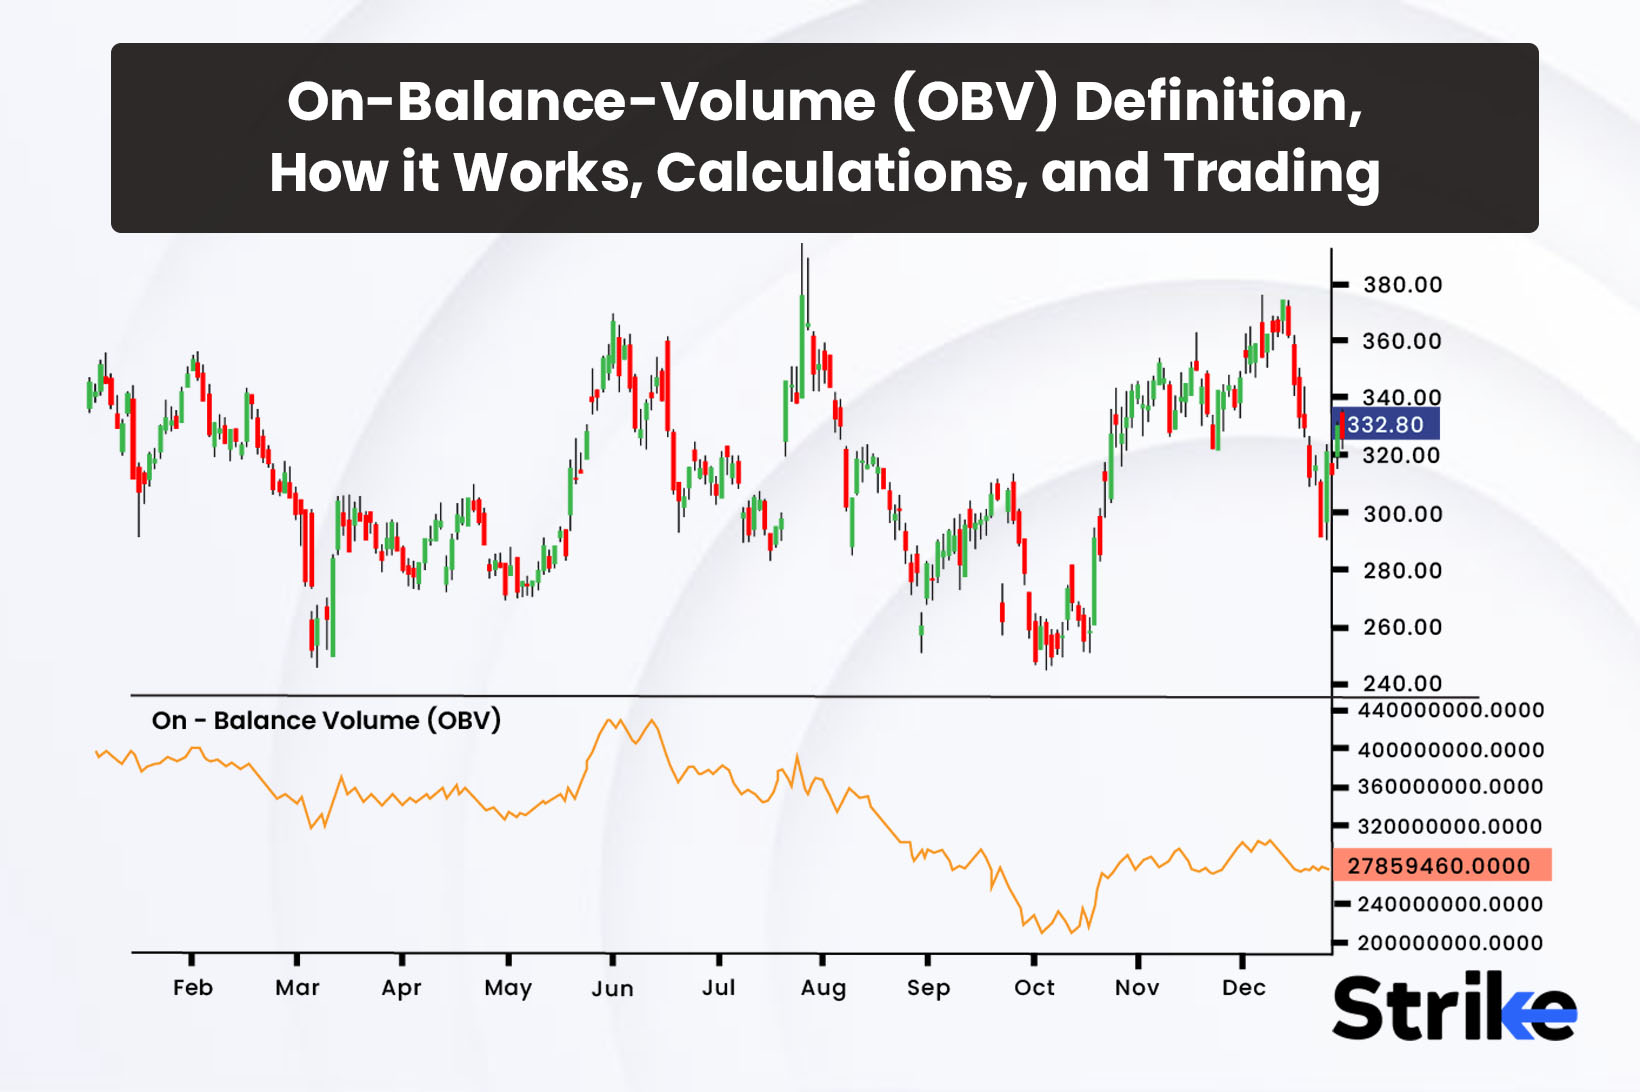 On-Balance-Volume (OBV): Definition, How it Works, Calculations, and Trading